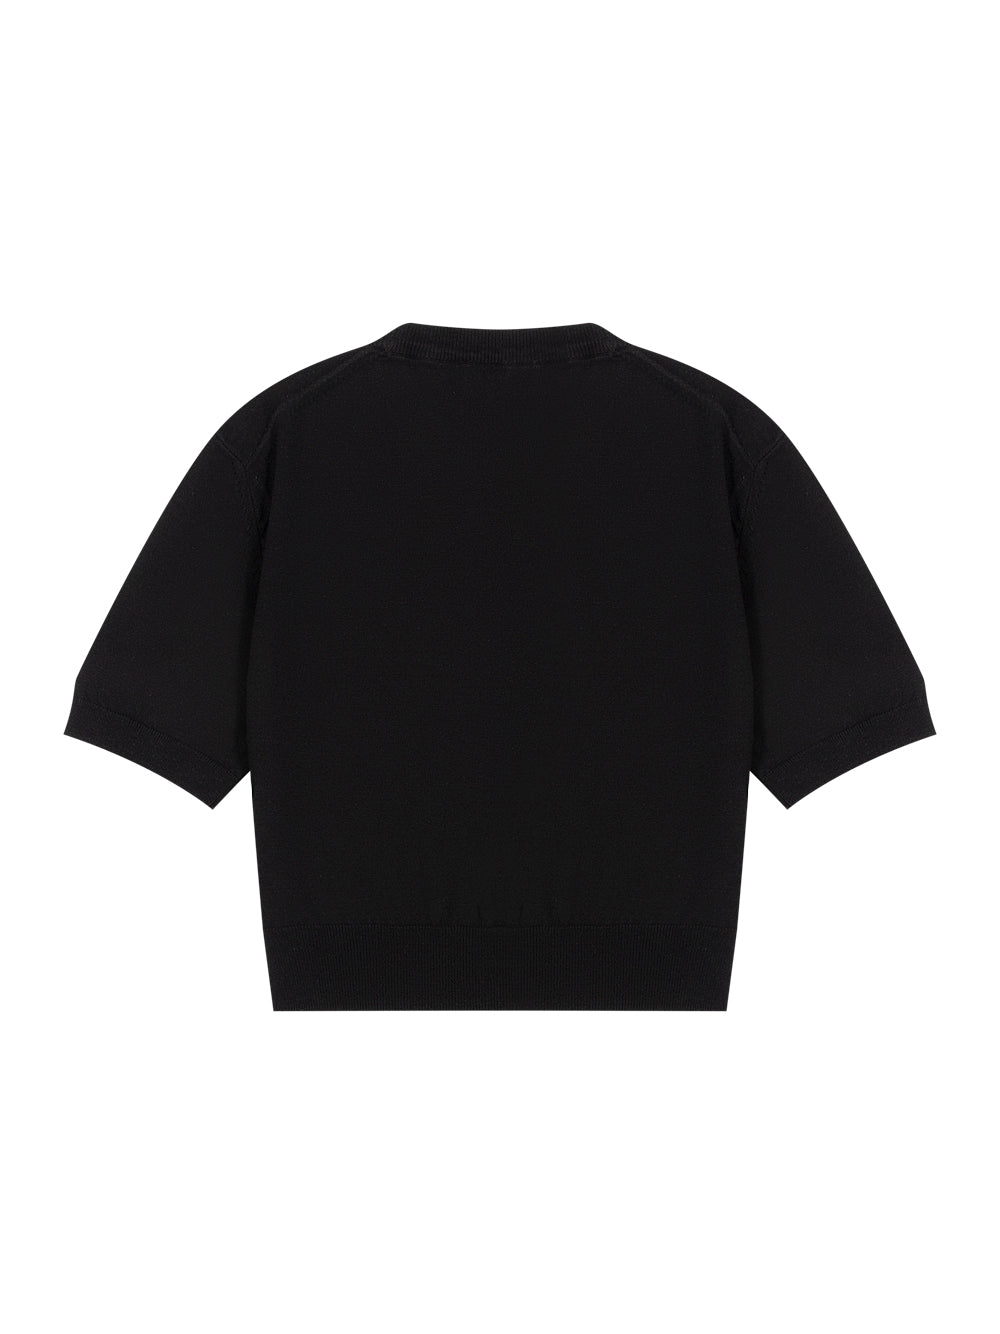 Cropped Knit Top (Black)